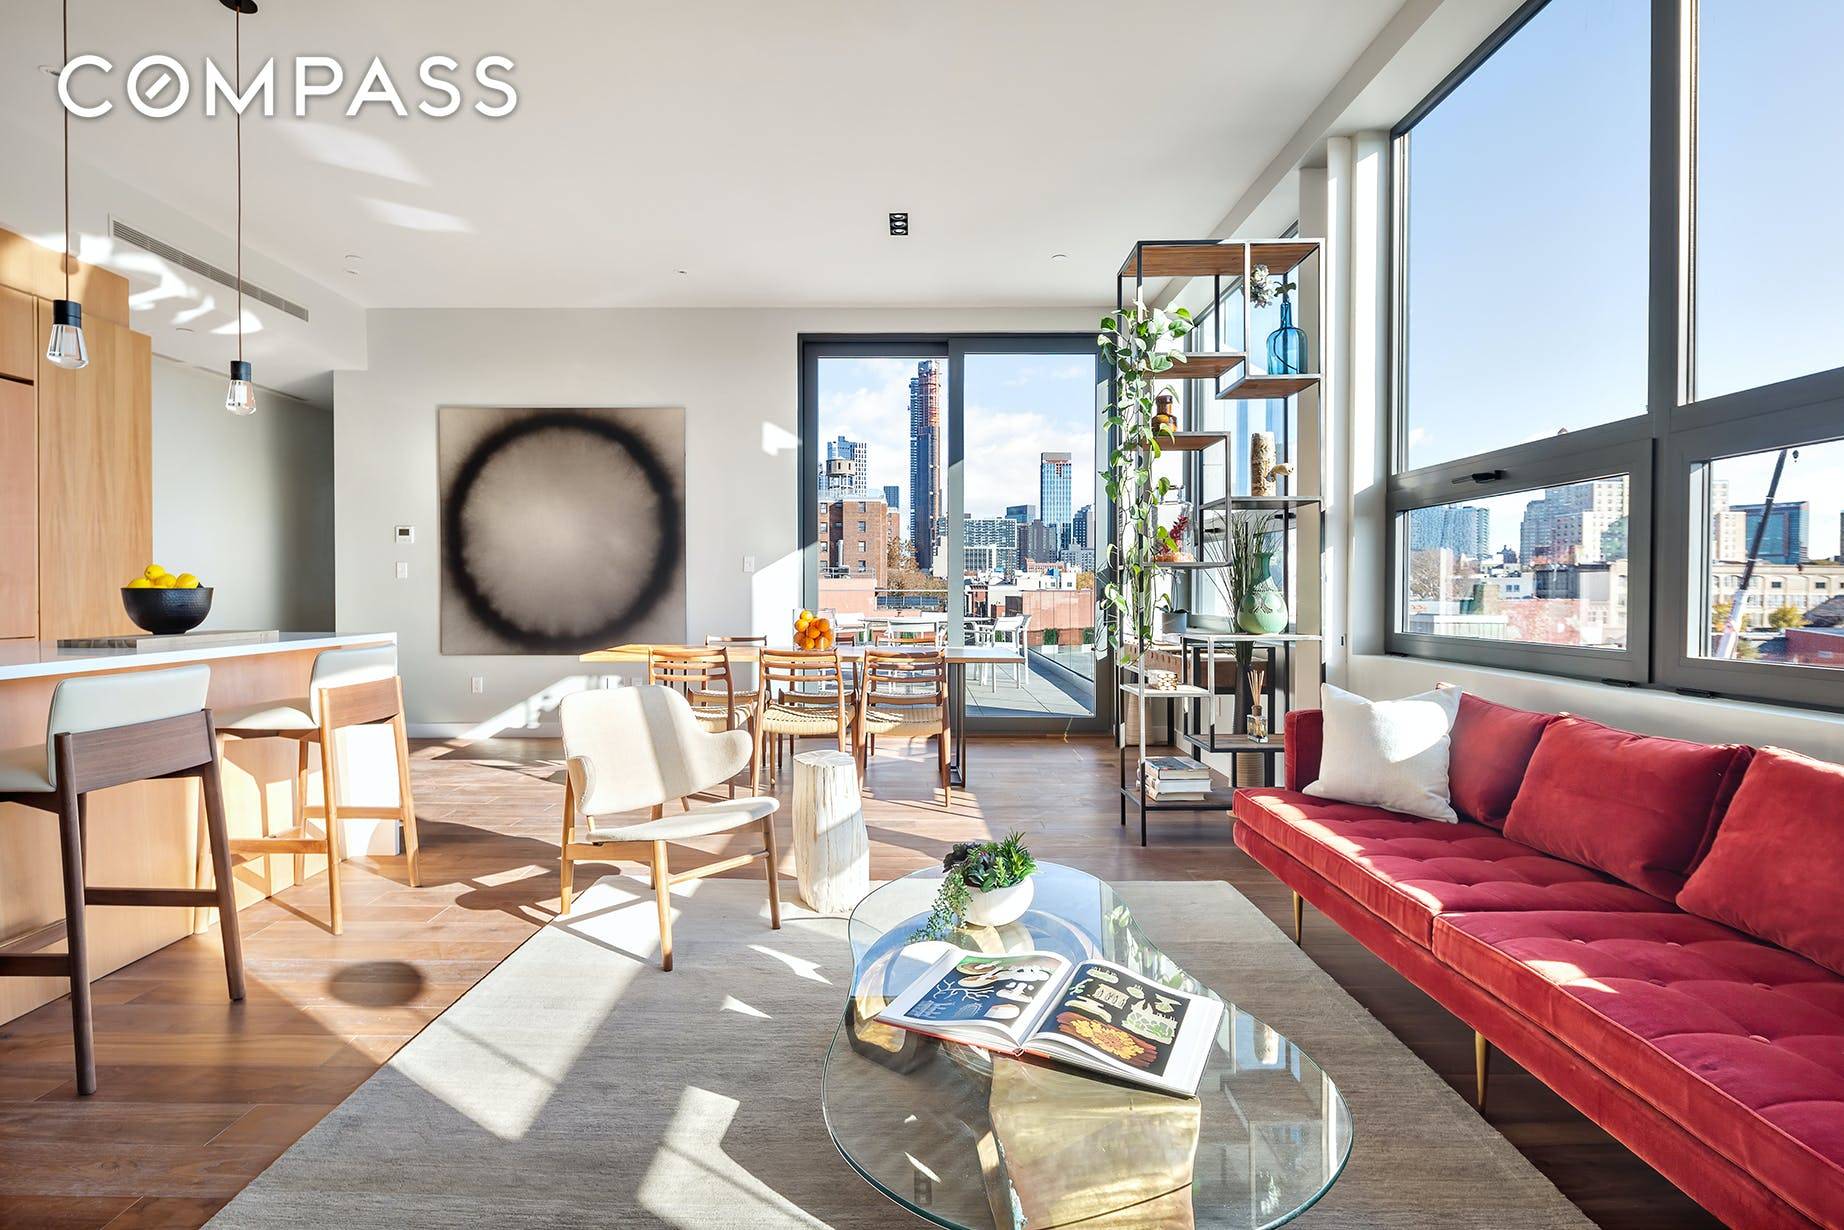 Welcome home to 480 Degraw, spacious modern condominiums in Carroll Gardens.